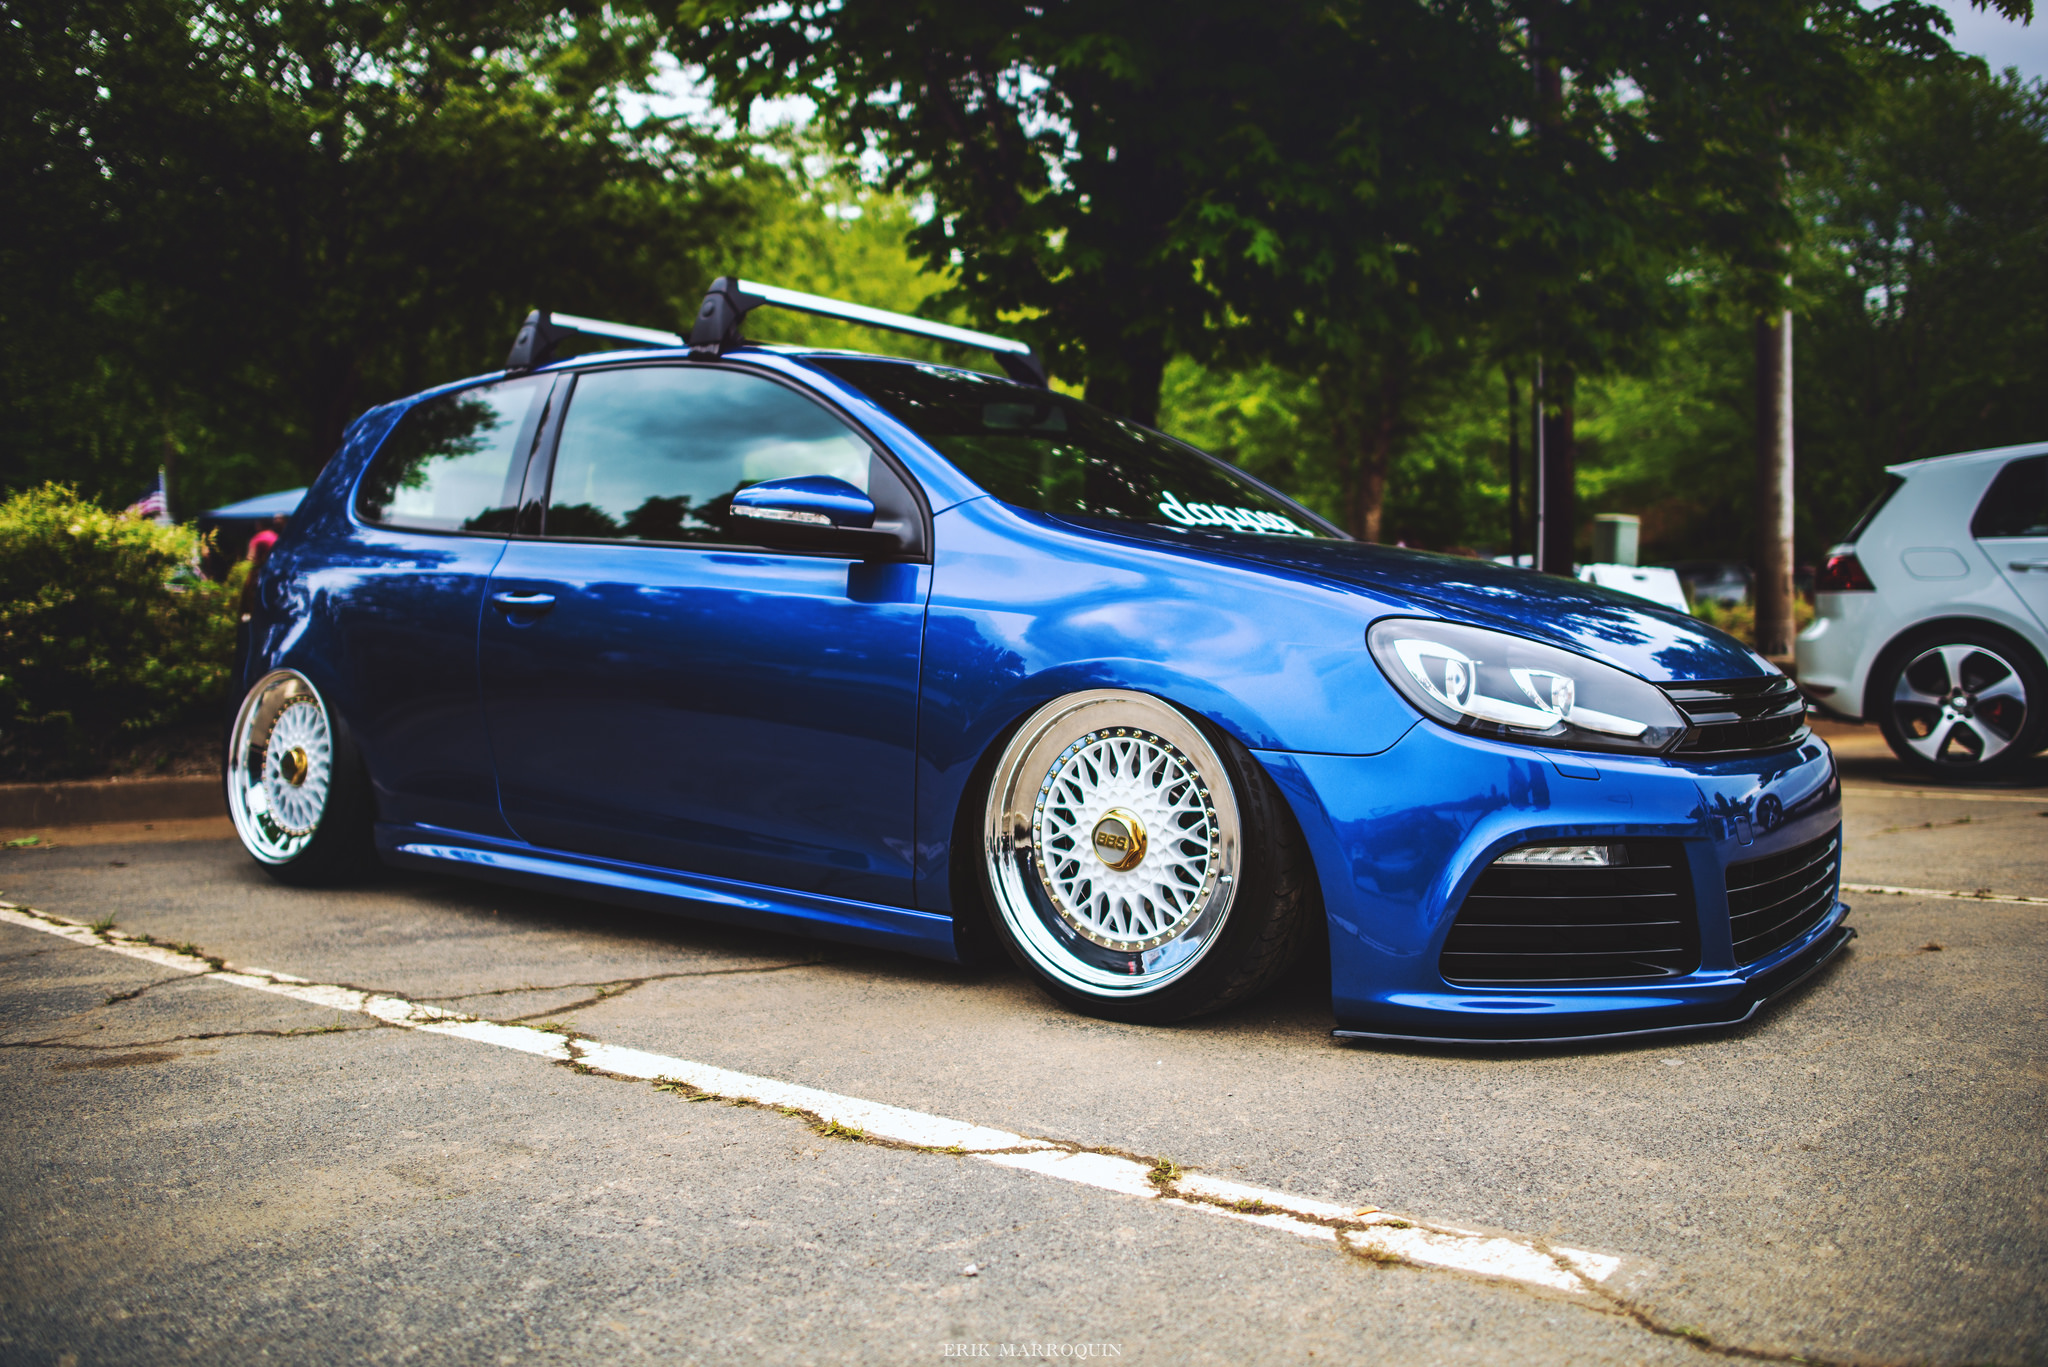 This Thing Is So Clean Stancenation Form Function